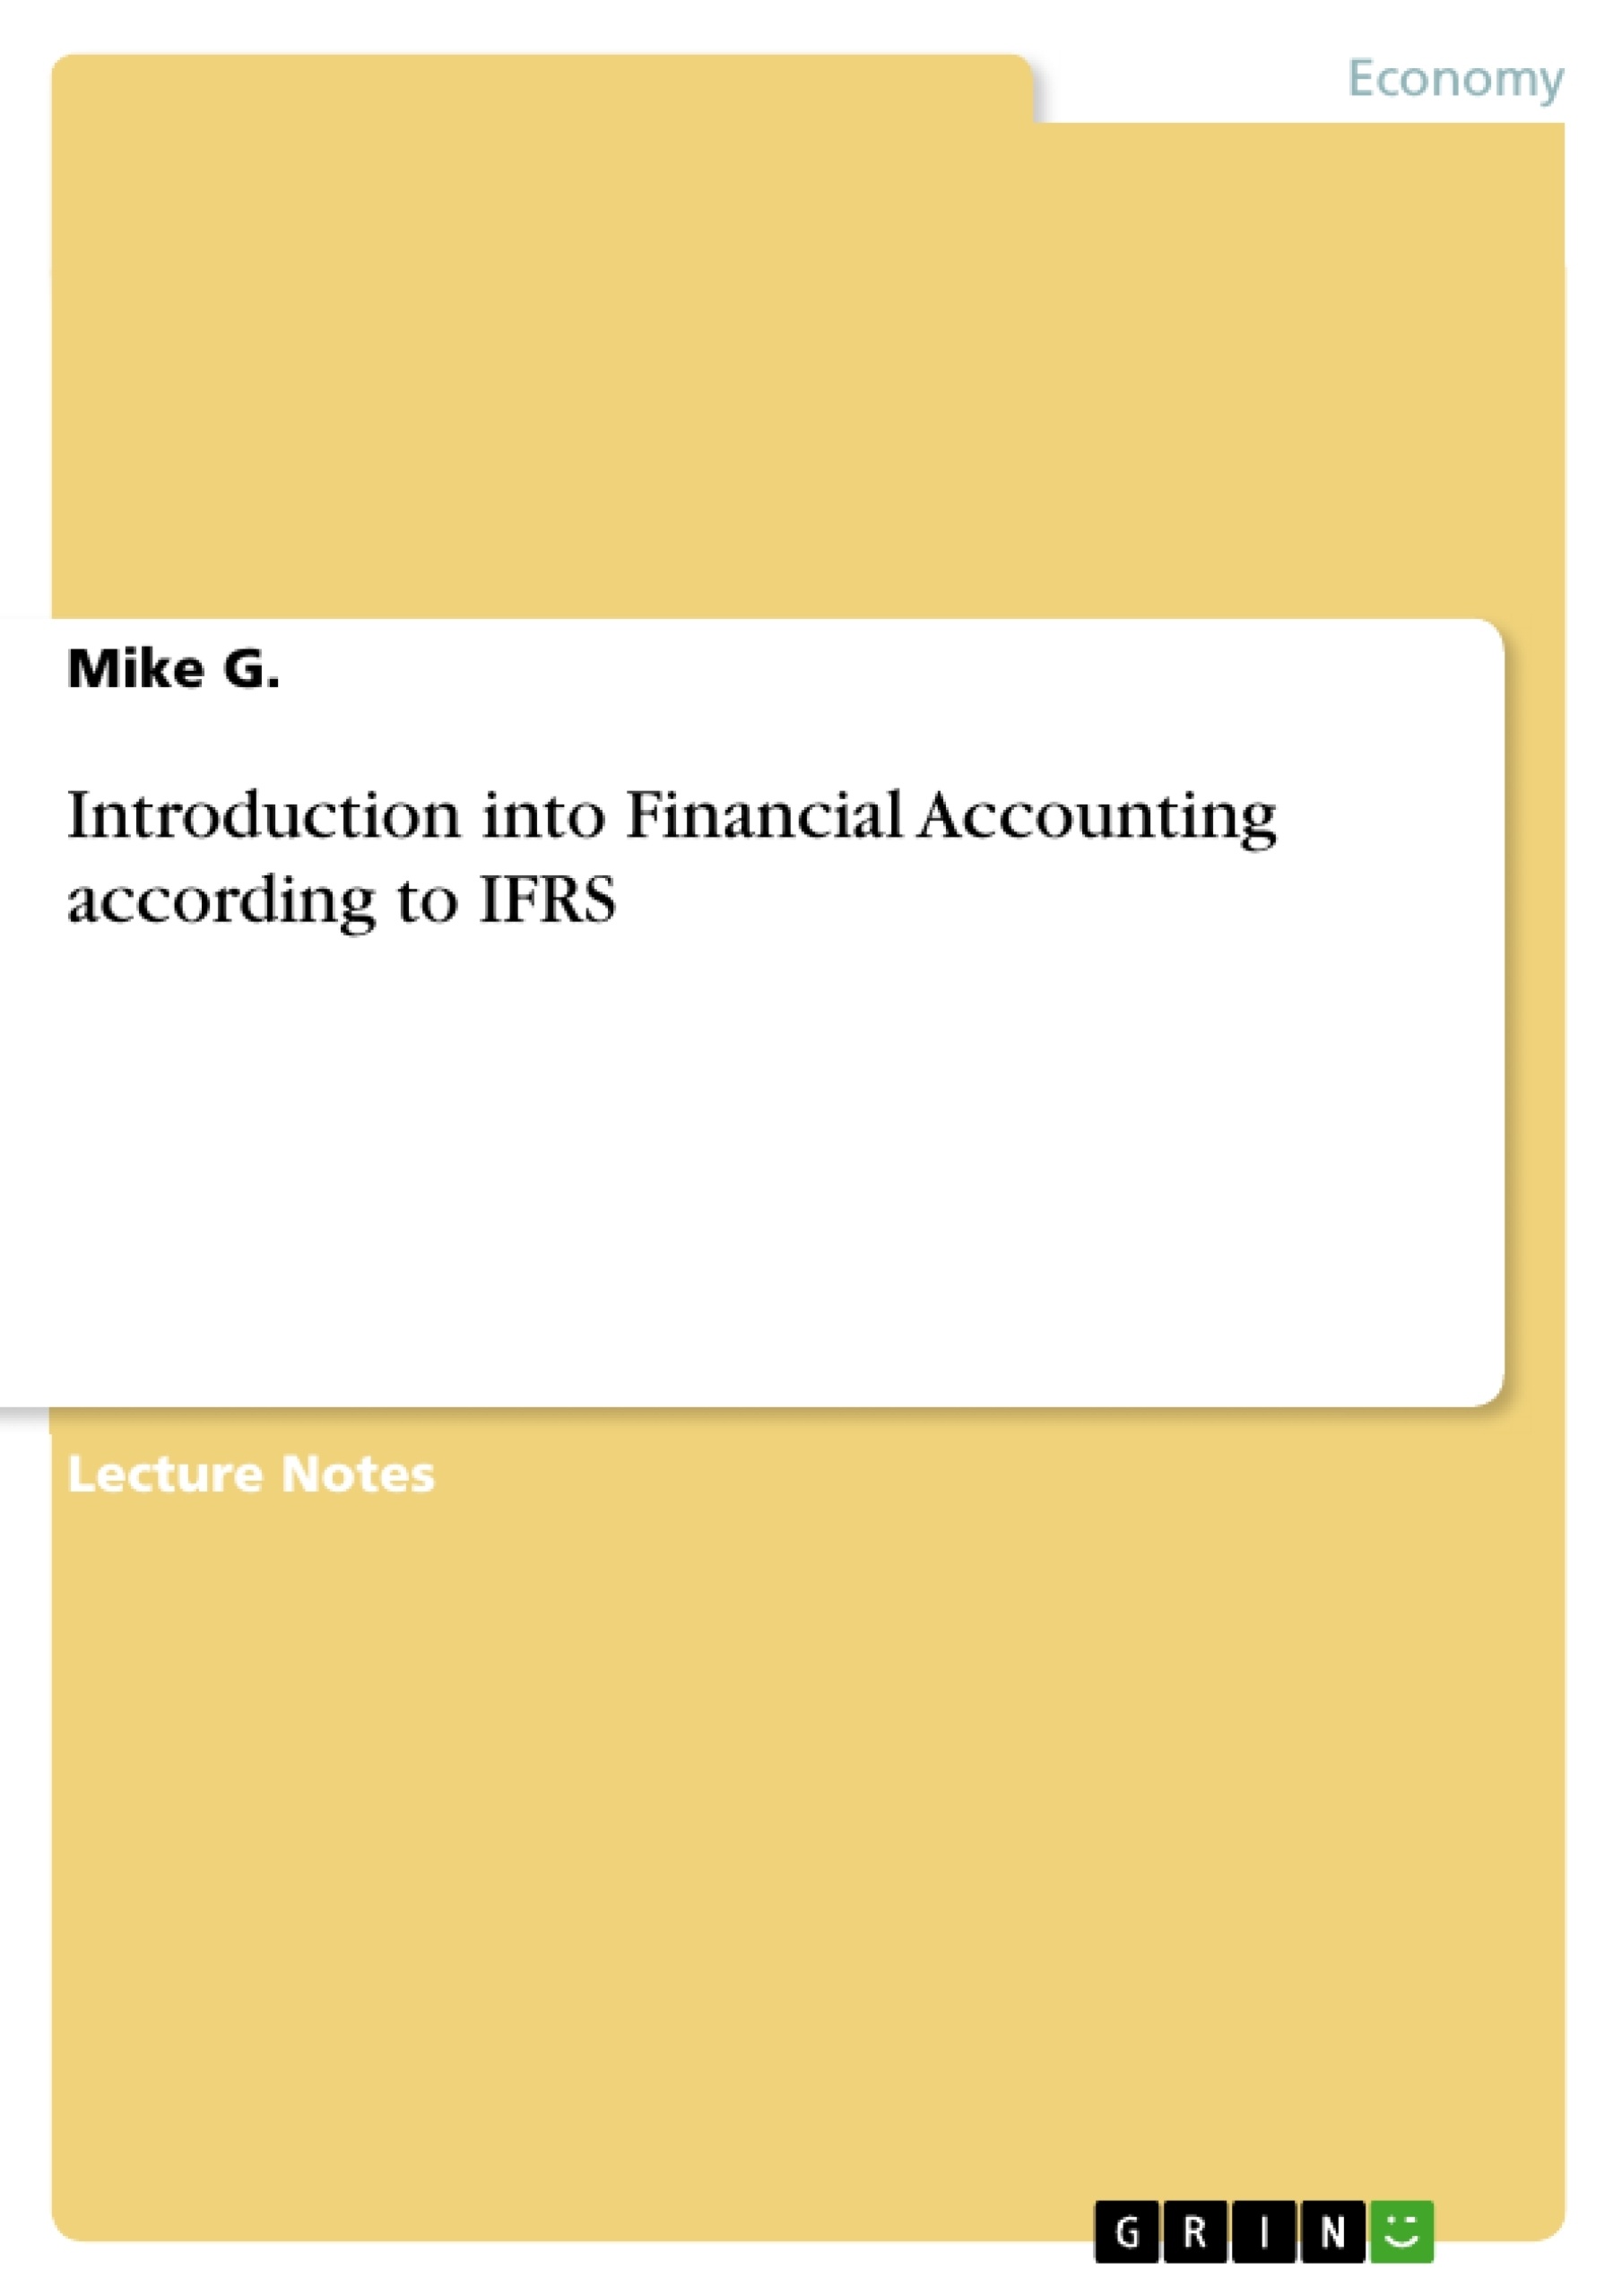 Title: Introduction into Financial Accounting according to IFRS